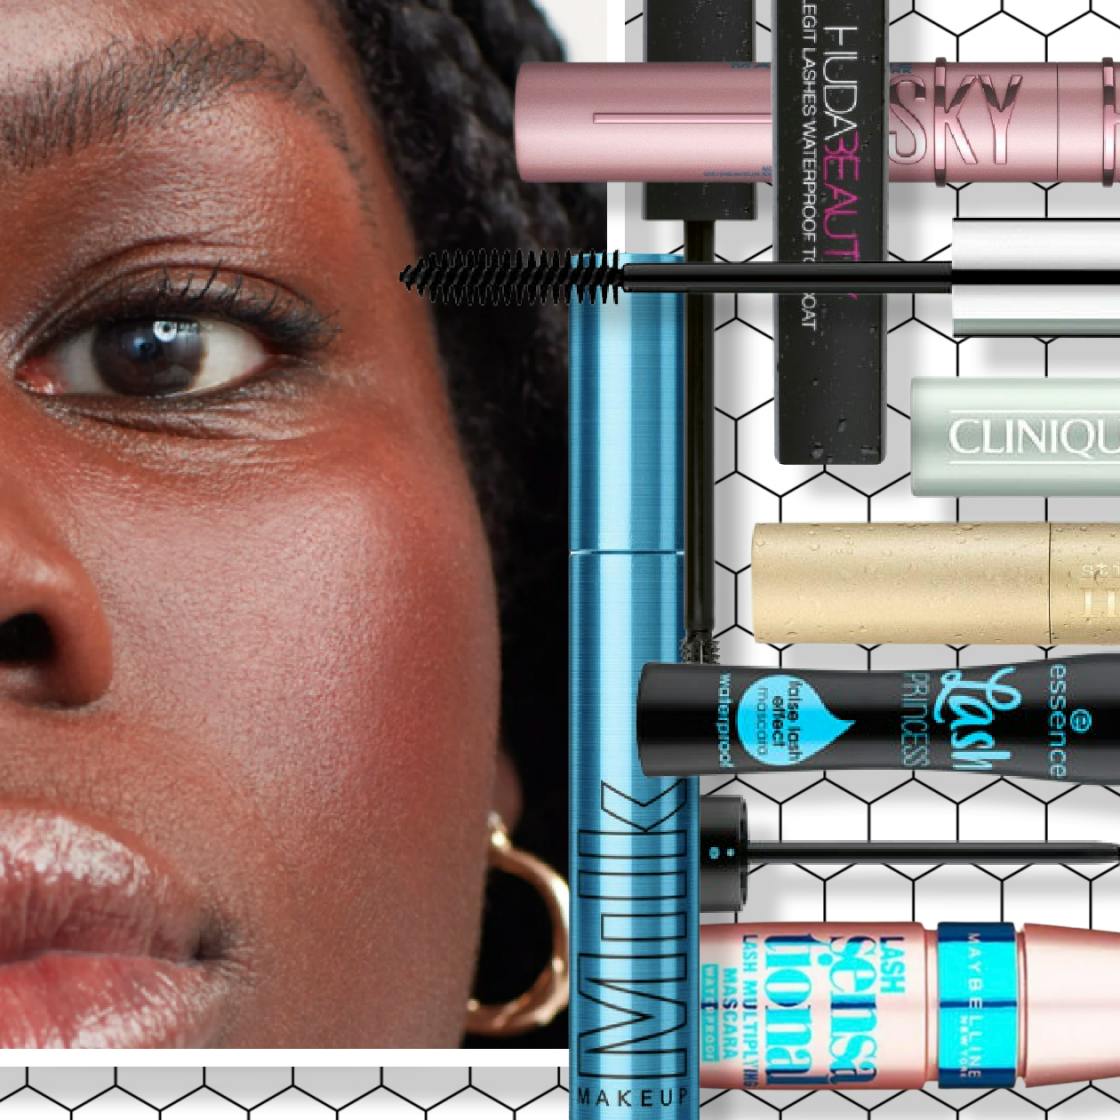 Best waterproof mascaras that don't budge or smudge